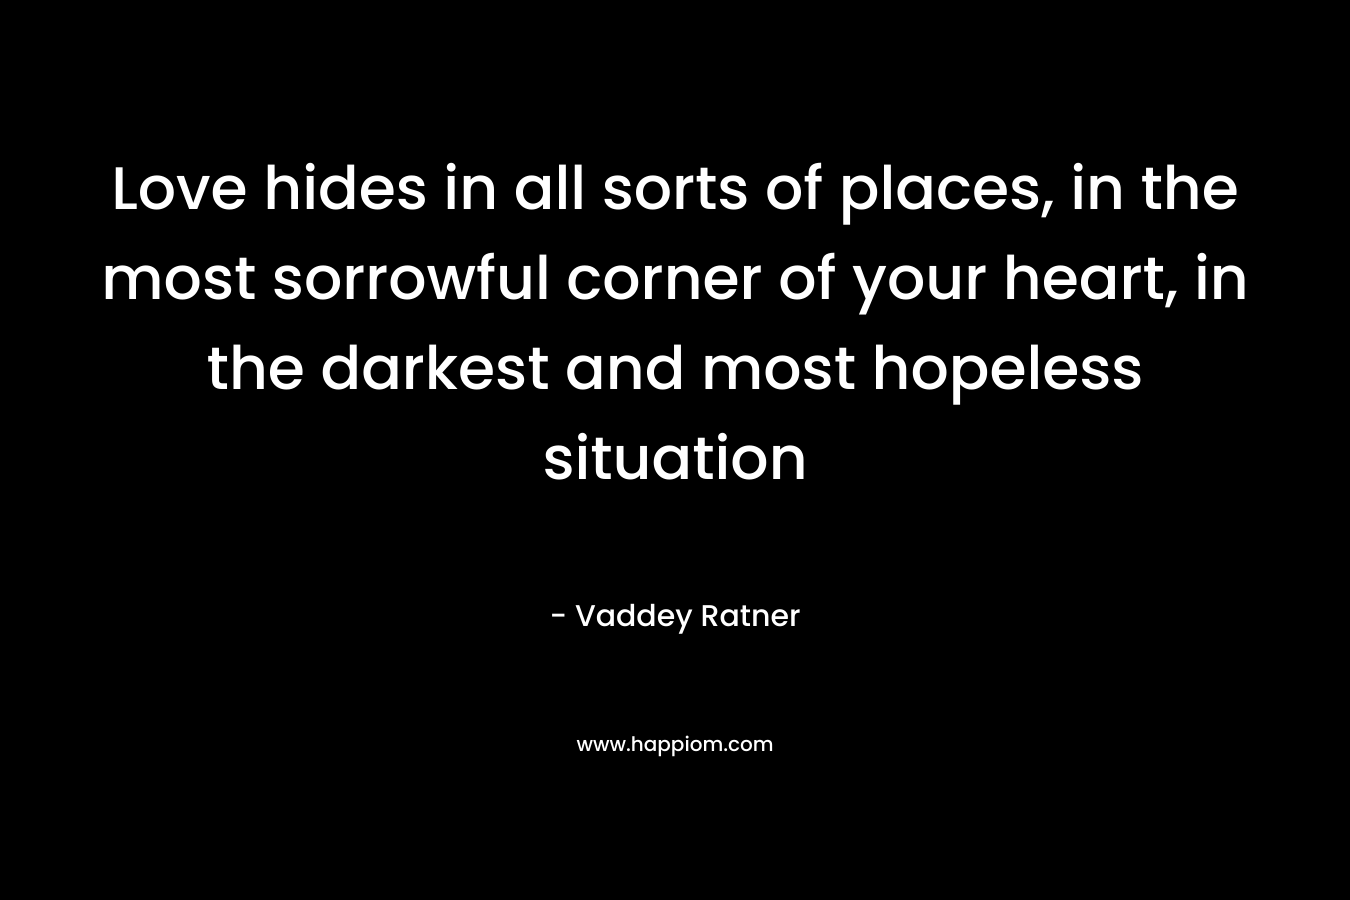 Love hides in all sorts of places, in the most sorrowful corner of your heart, in the darkest and most hopeless situation